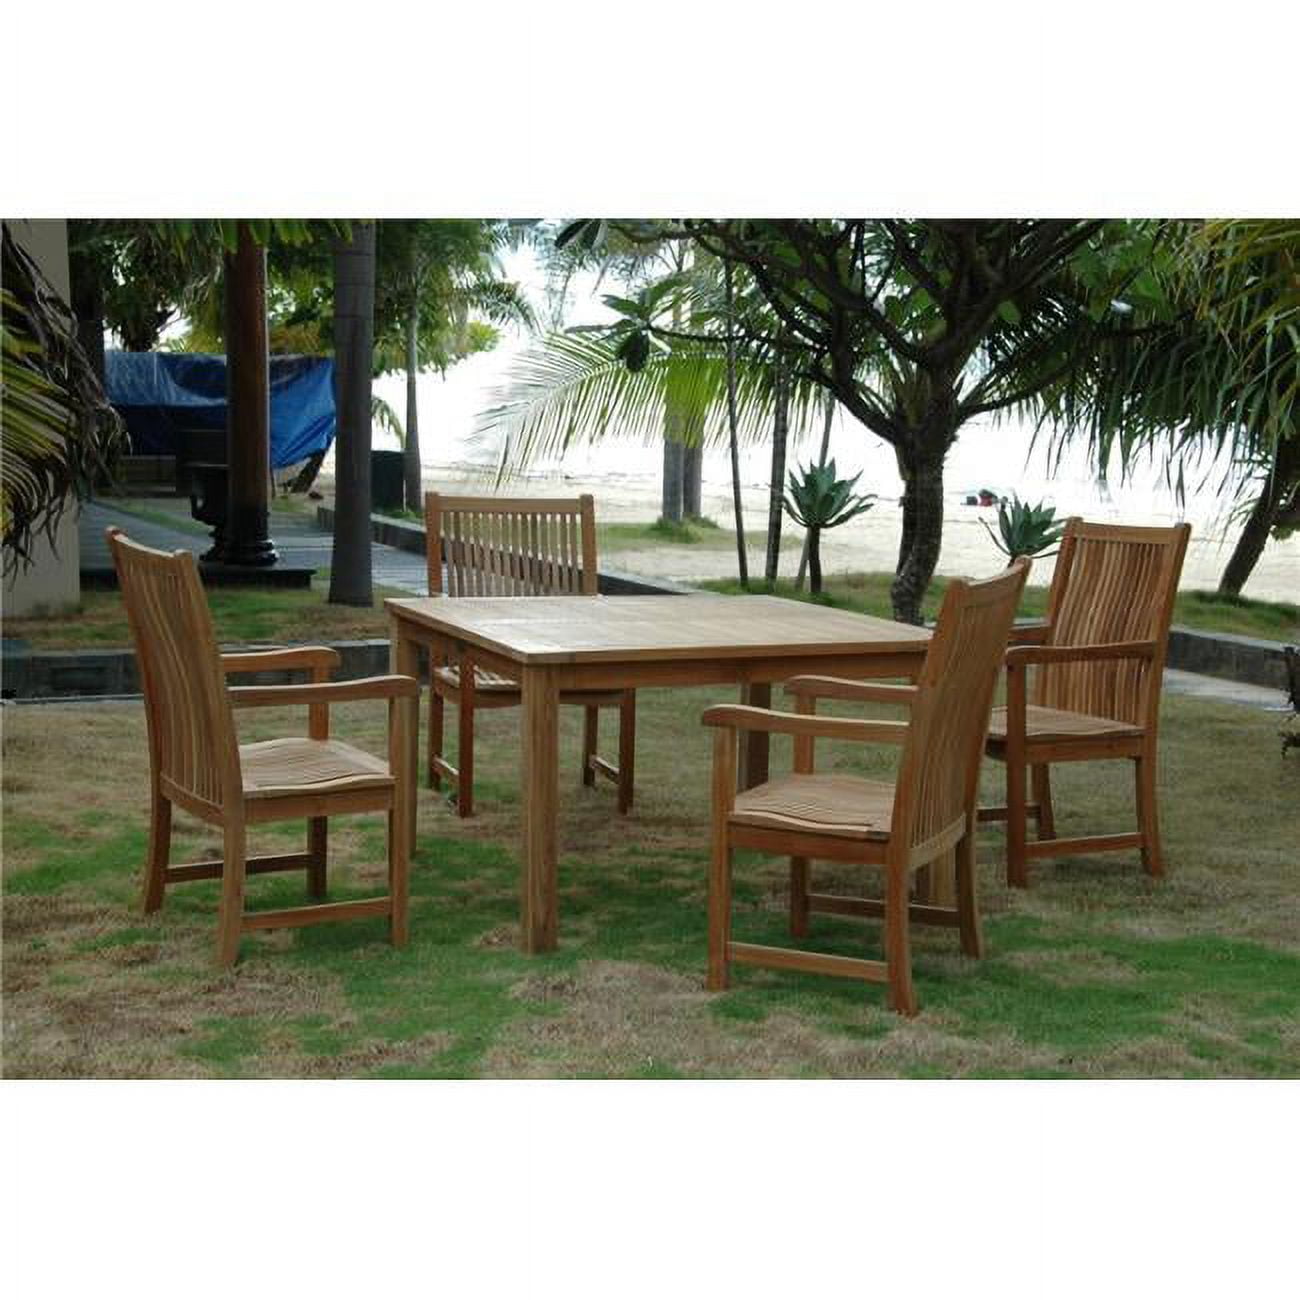 Picture of Anderson Teak Set-102 Chicago Armchair - Pack of 4